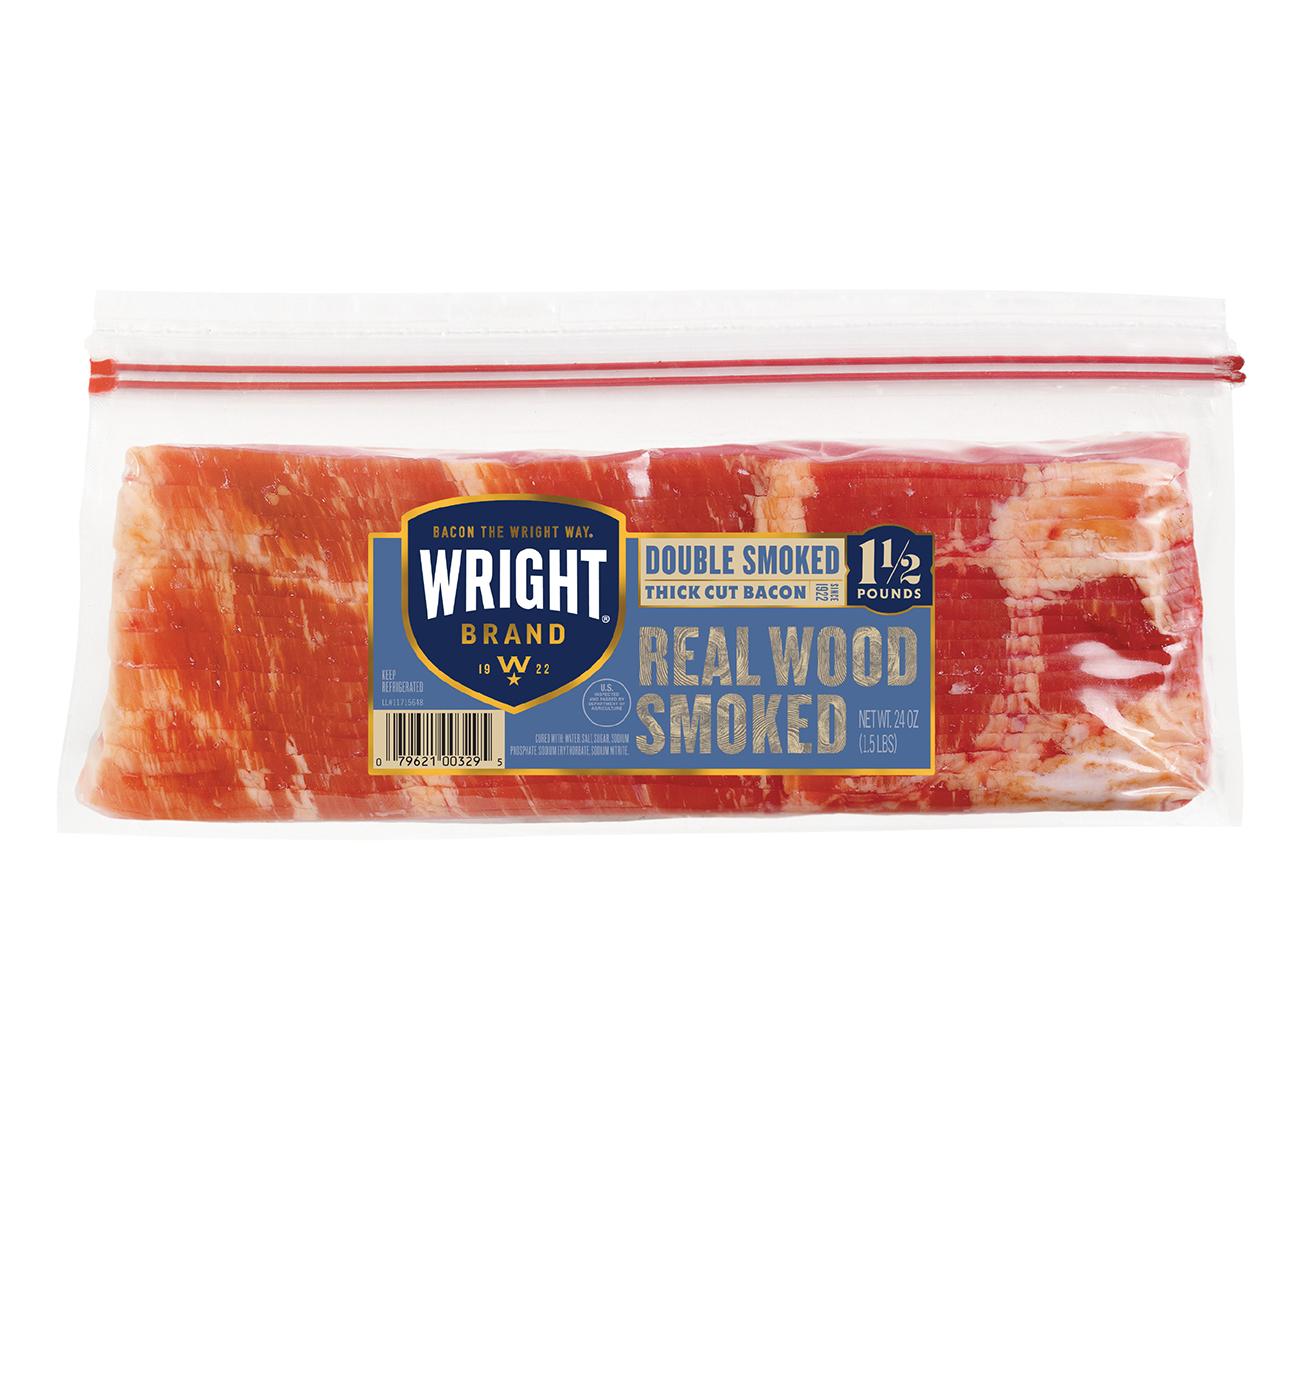 Wright Brand Real Wood Double Smoked Thick Cut Bacon; image 1 of 6